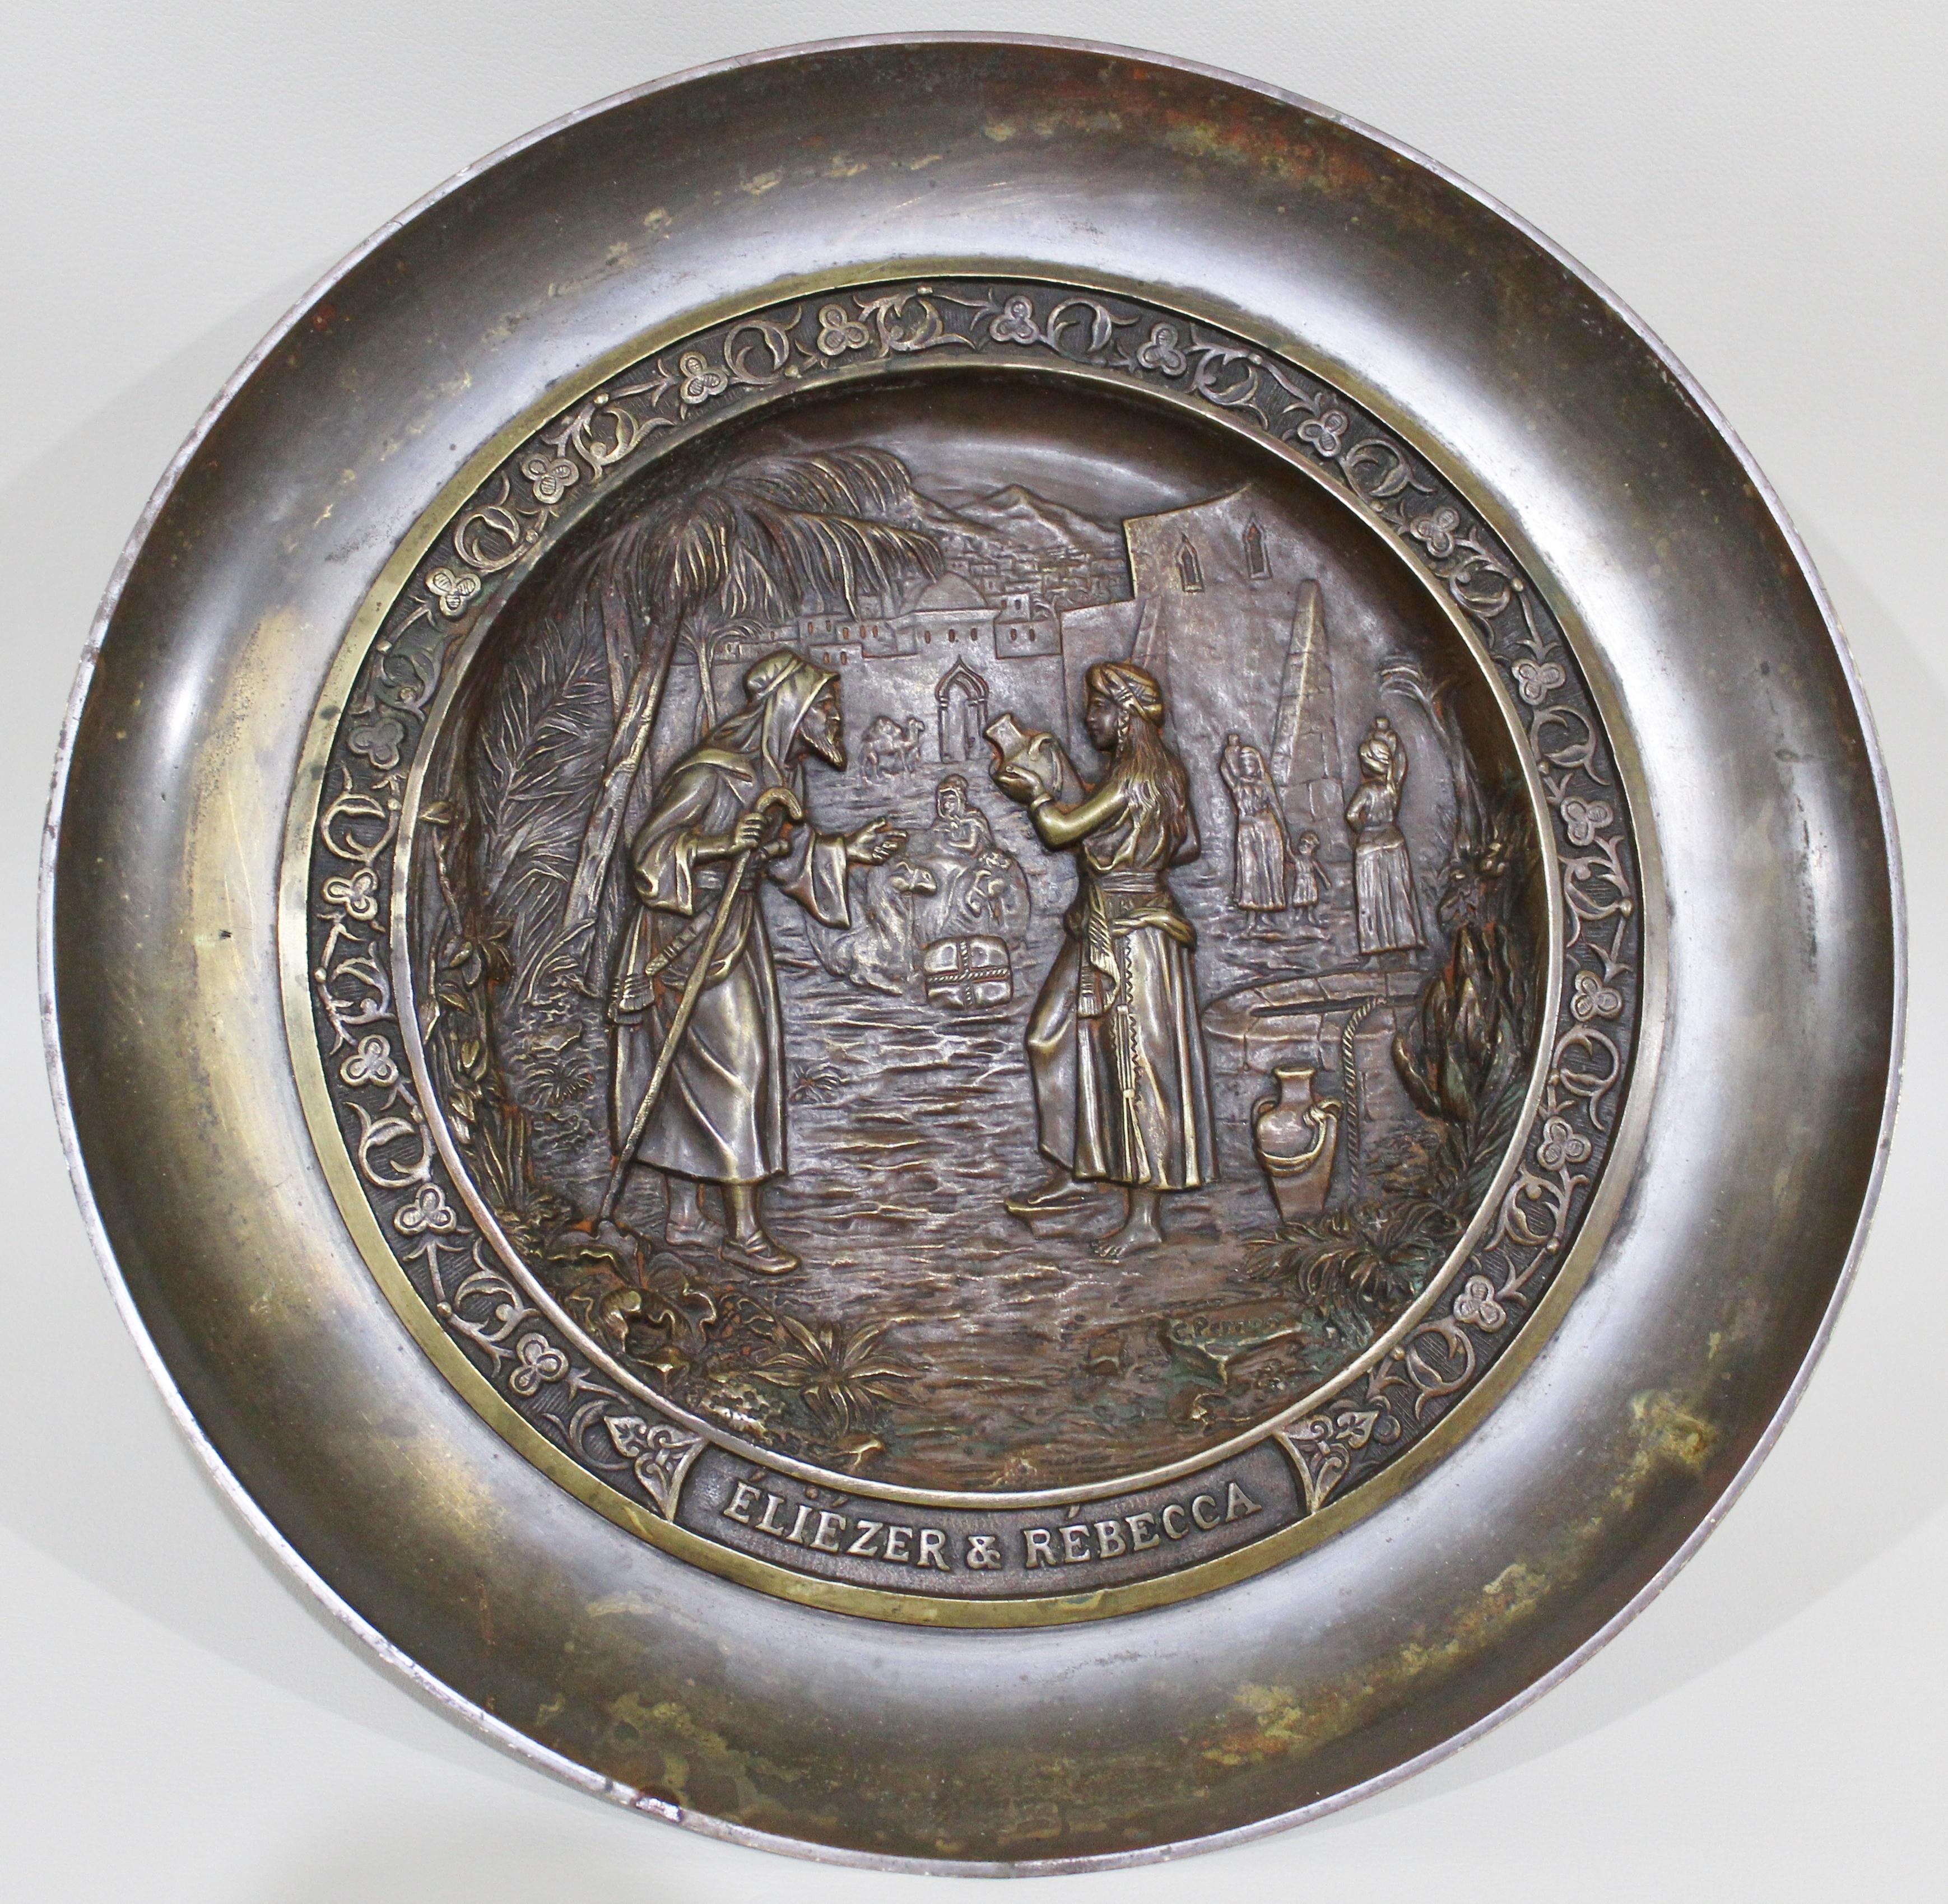 Signed C. Perron cast bronze tazza depicting the Judaic allegorical story of Eliezer finding a wife for Abraham's son Isaac and with the assistance of Rebecca, determines she is the best choice for him. The tazza is clearly signed 